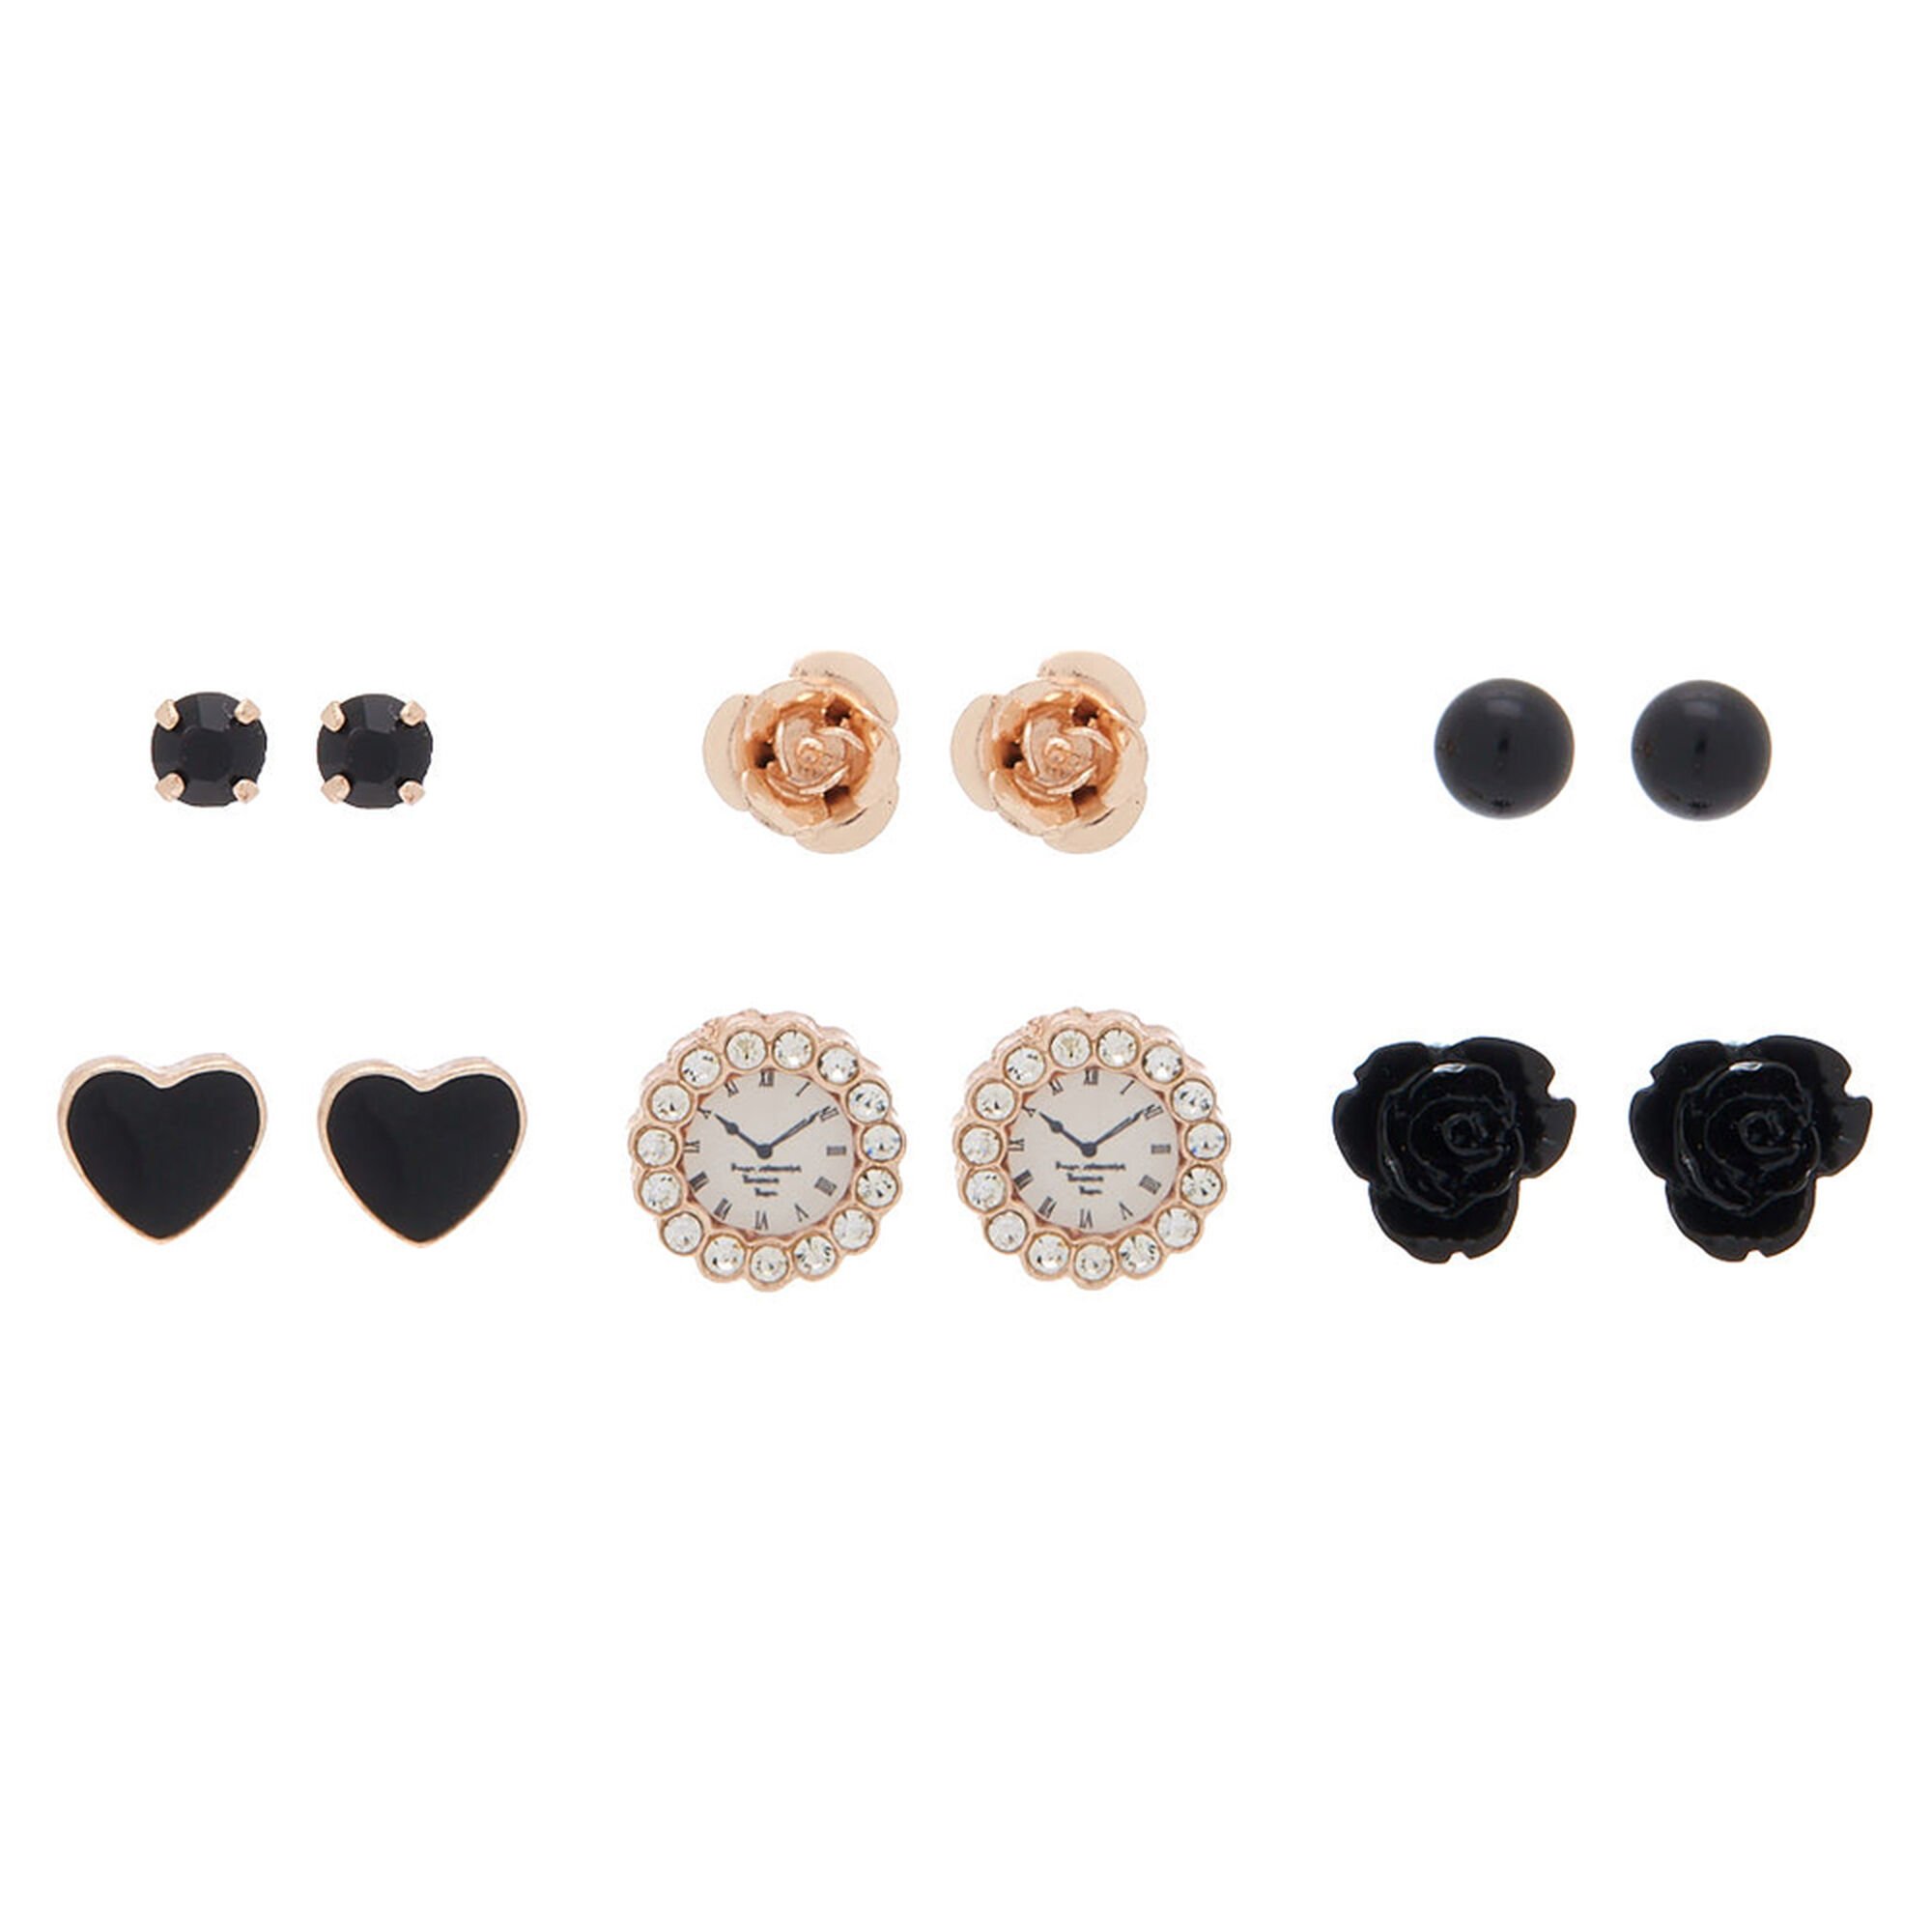 View Claires Rose Mixed Stud Earrings Black 6 Pack Gold information